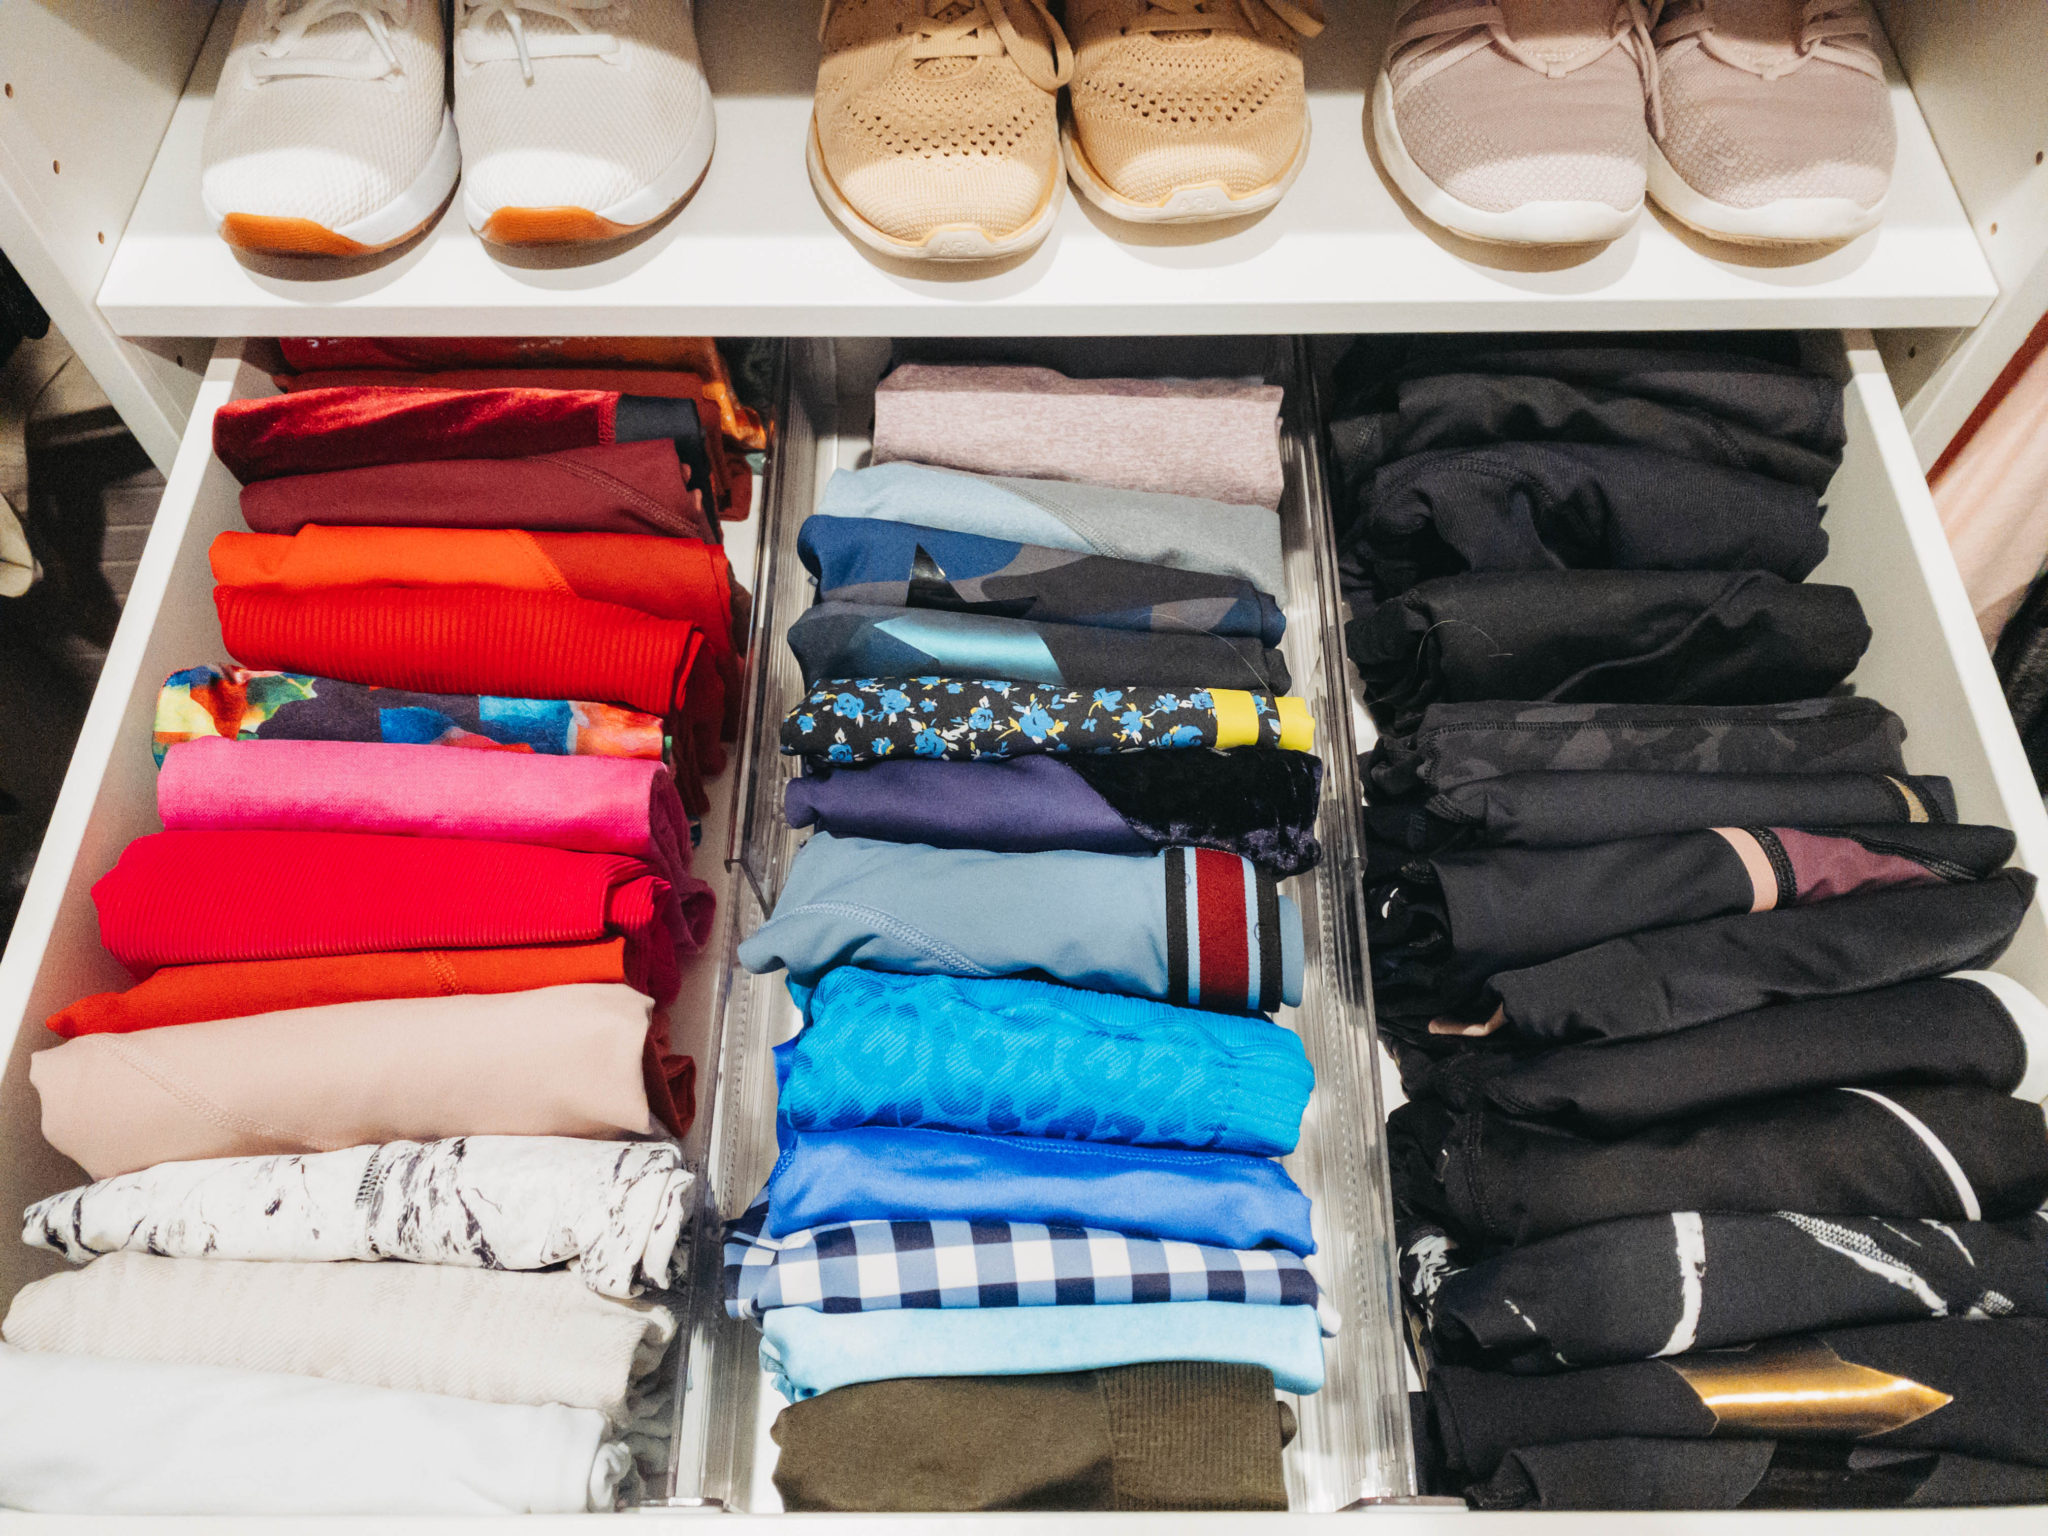 30 Minute How to organize workout clothes in drawers for push your ABS